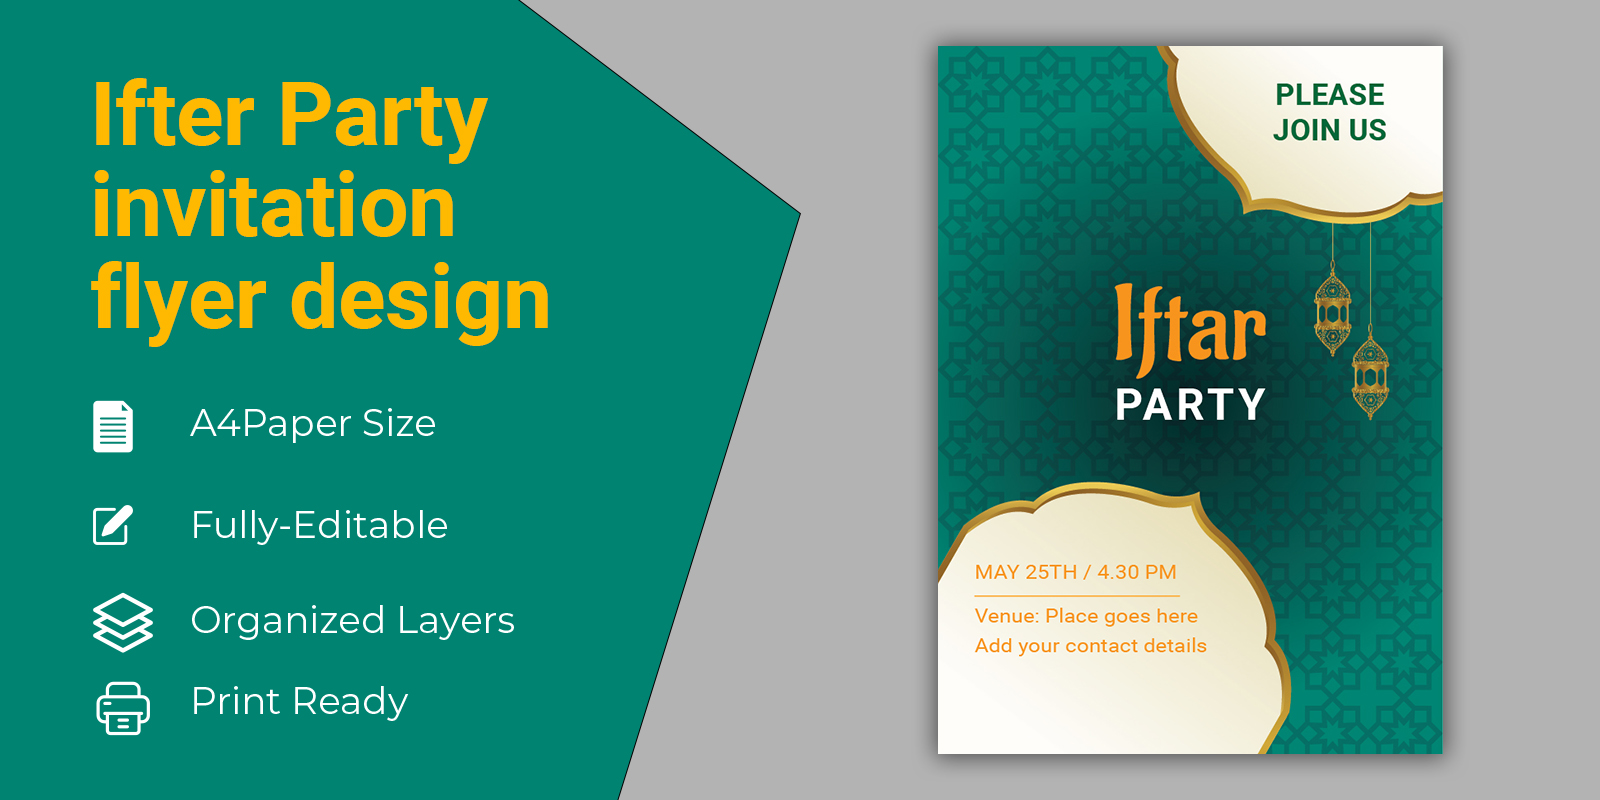 Ftar Banner or Flyer Design - Corporate Identity Template